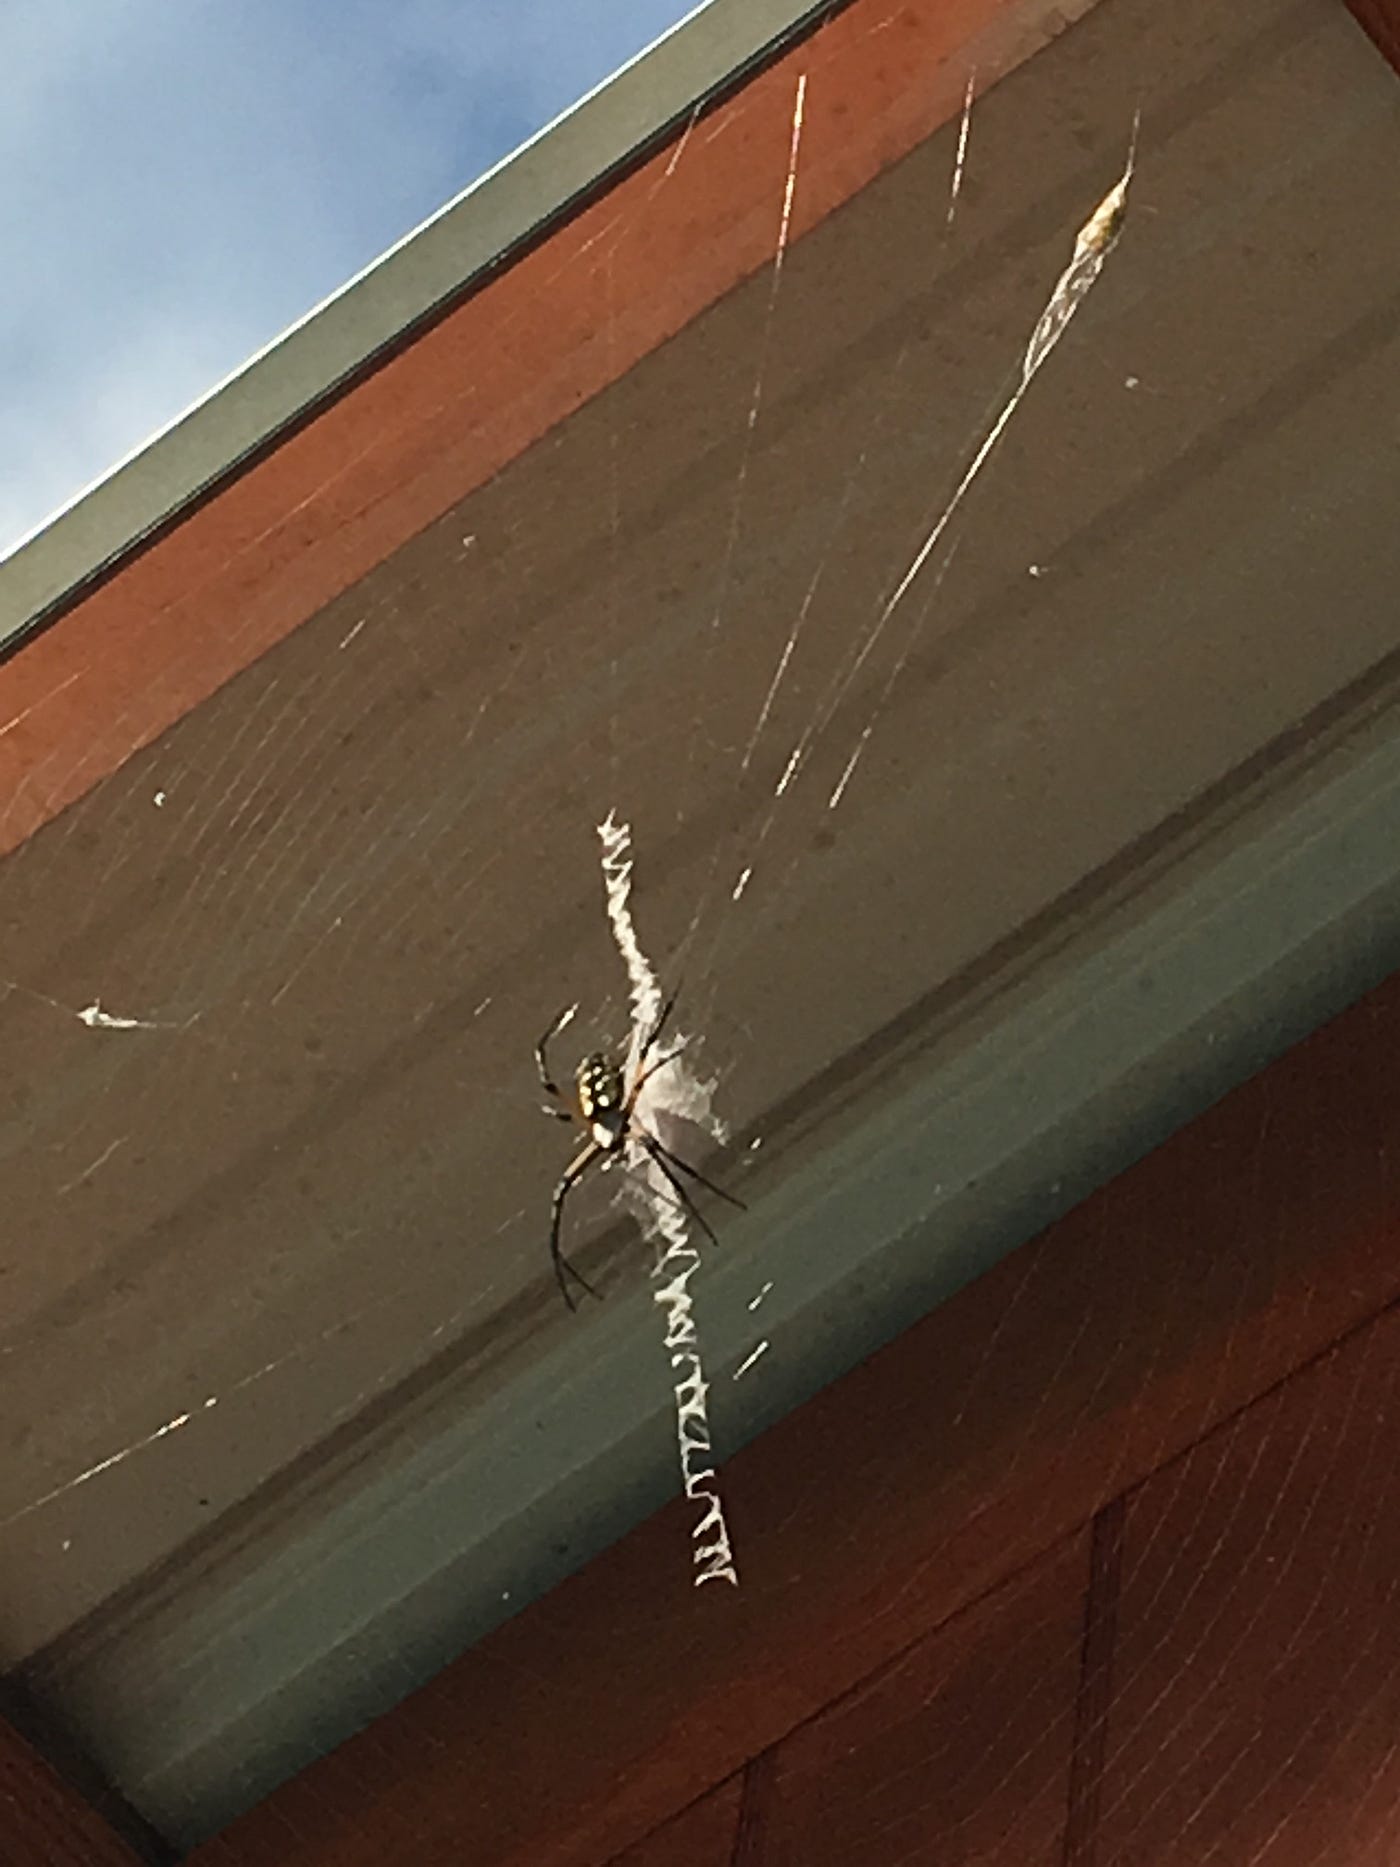 Musings from the Back Porch – Garden Spider